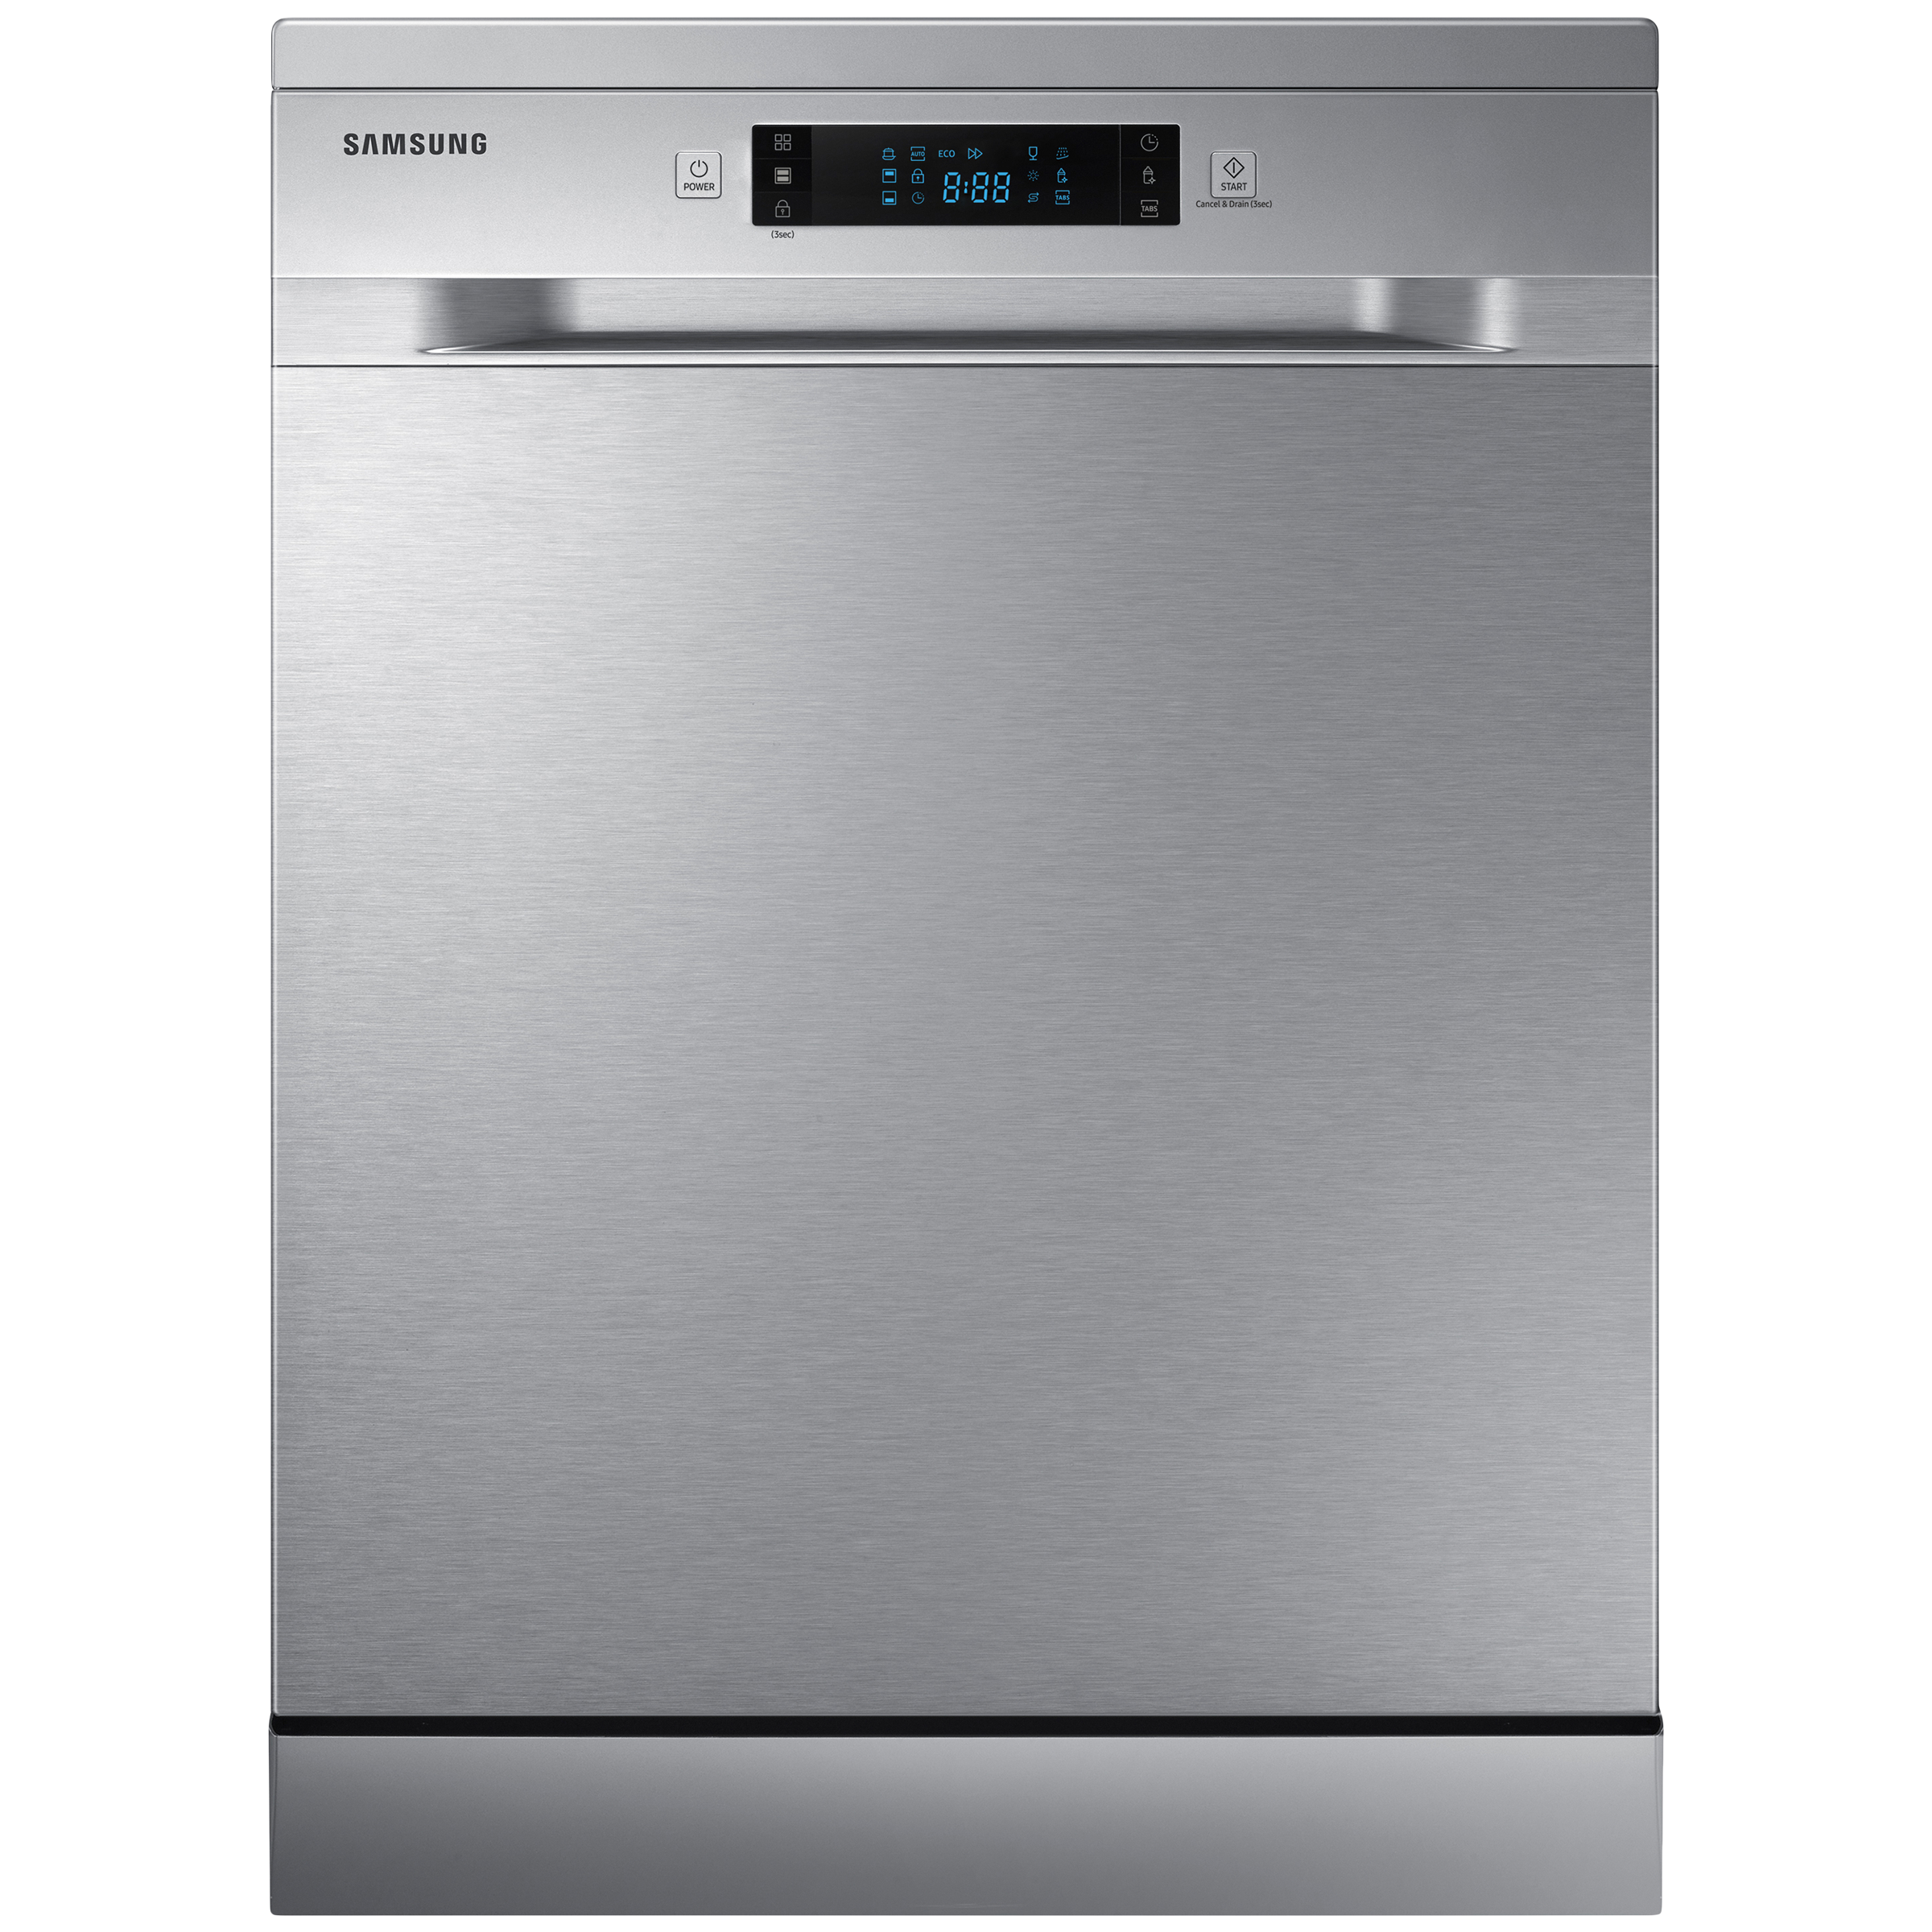 Samsung 13 Place Setting Freestanding Dishwasher (Auto Release, DW60M6043FS/TL, Silver)_1